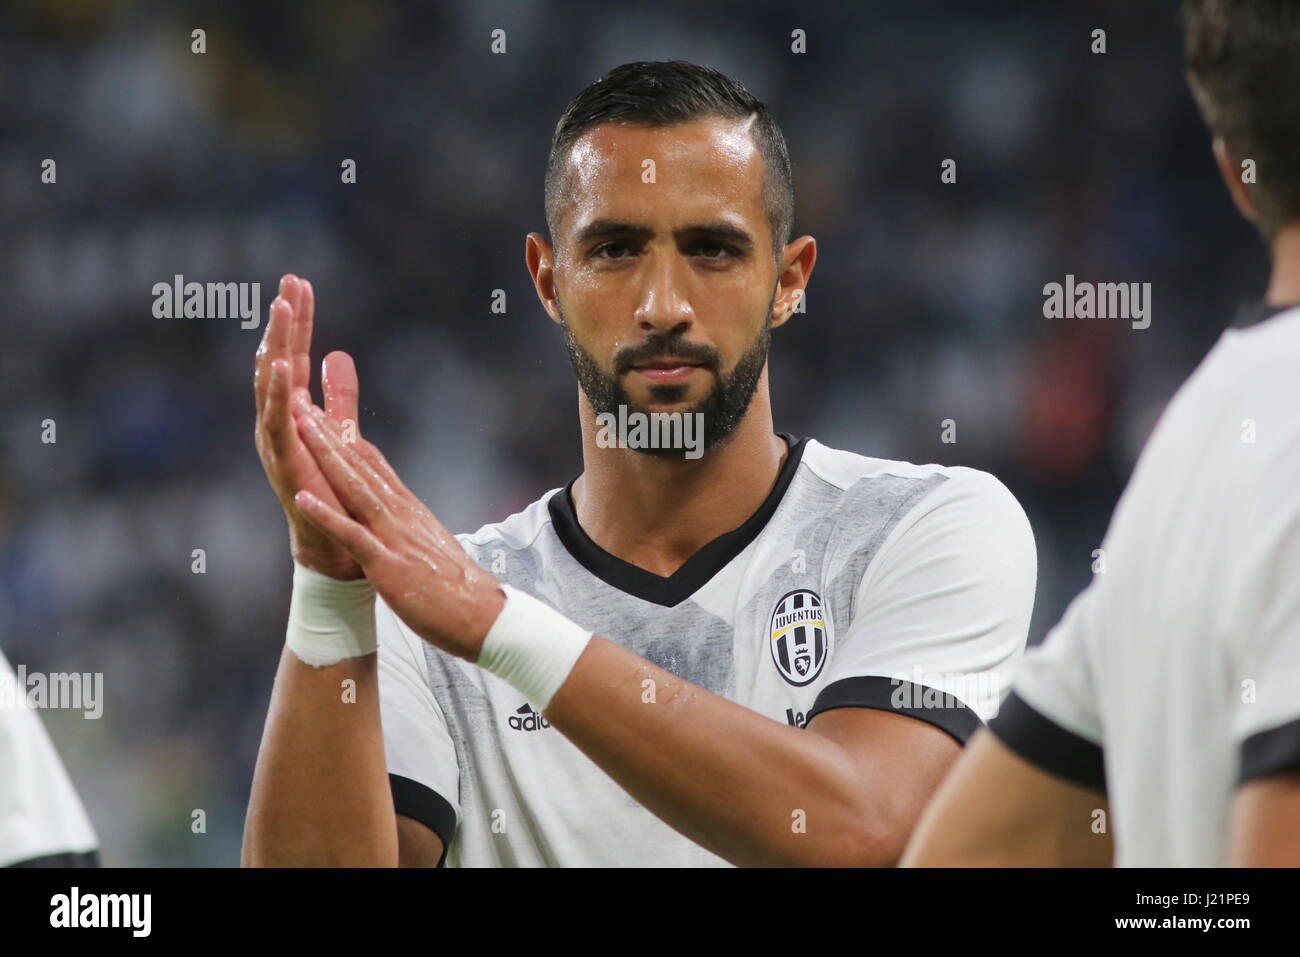 Turin, Italy. 23rd Apr, 2017. Medhi Benatia (Juventus FC) before during the Serie A football match between Juventus FC and Genoa FC at Juventus Stadium on April 23, 2017 in Turin, Italy. Credit: Massimiliano Ferraro/Alamy Live News Stock Photo